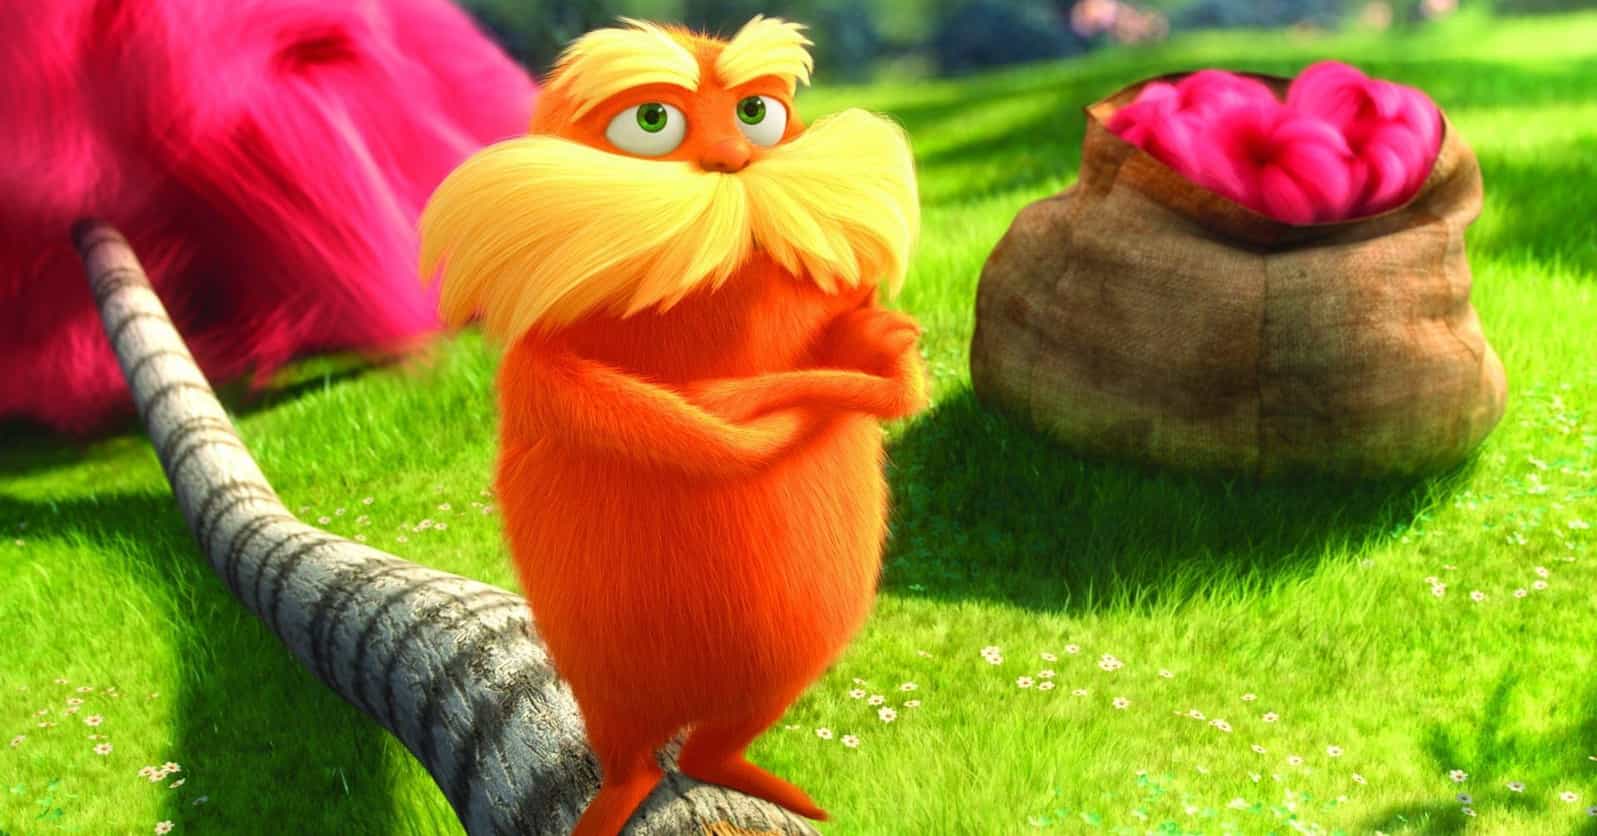 The 25 Best Movies Like 'The Lorax', Ranked By Fans